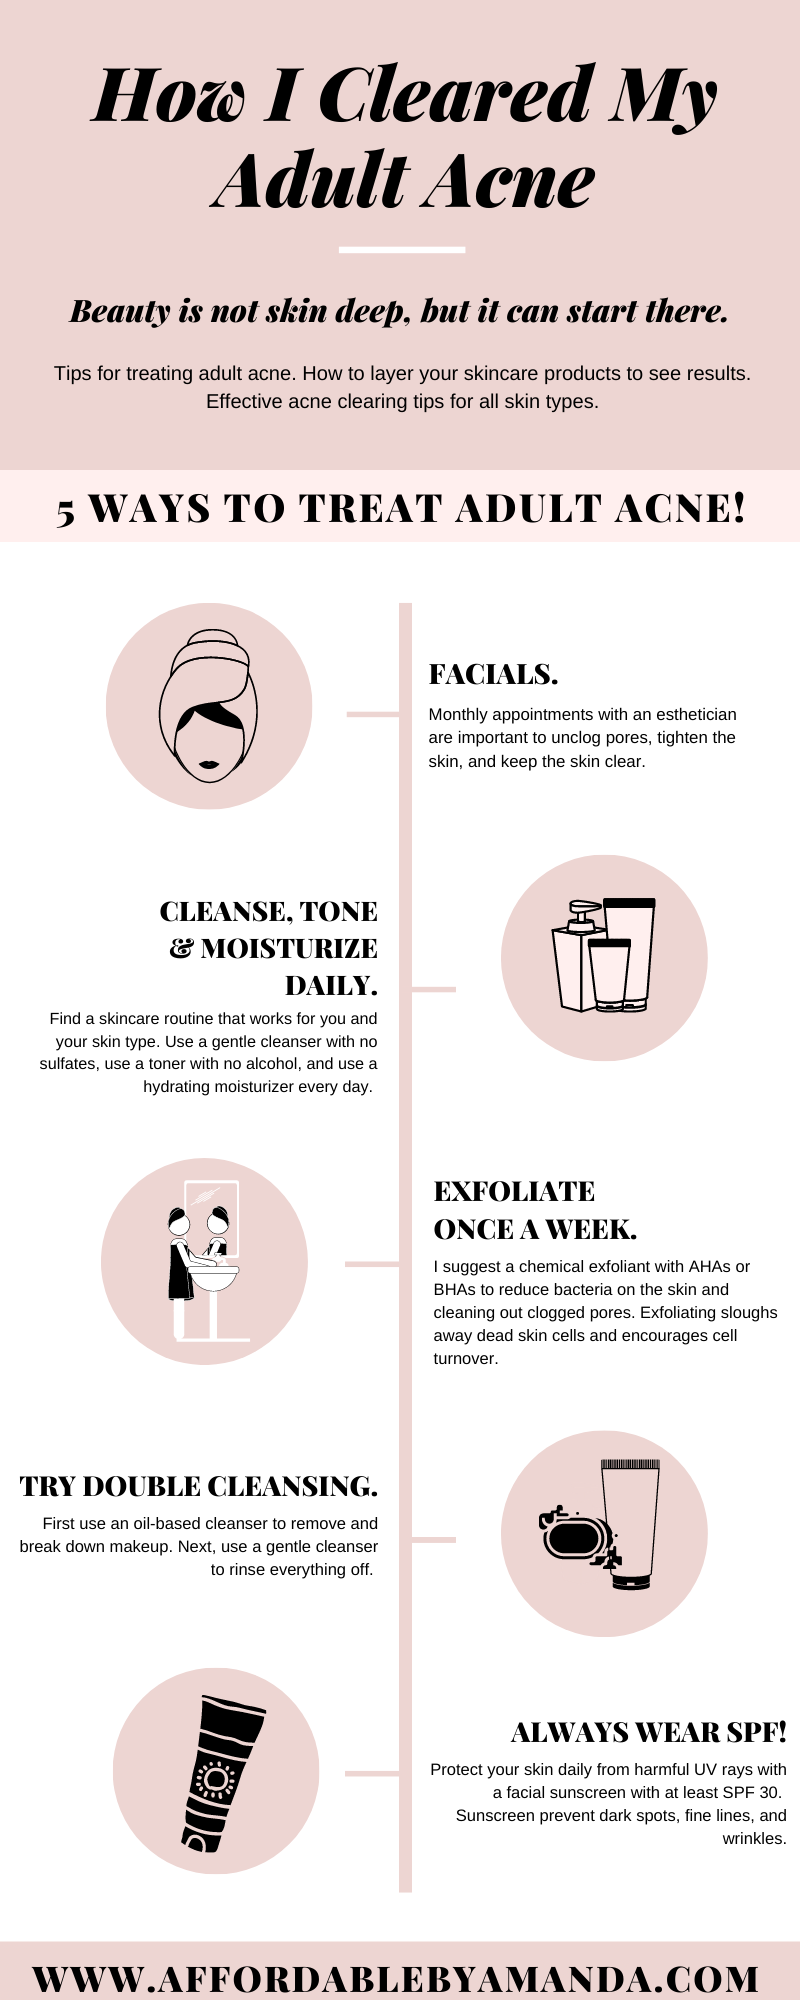 How I Cleared My Adult Acne.The Best Adult Acne Treatments 2020. How to Fight Adult Acne. Adult Acne Products. Adult Acne Skin Care Tips.